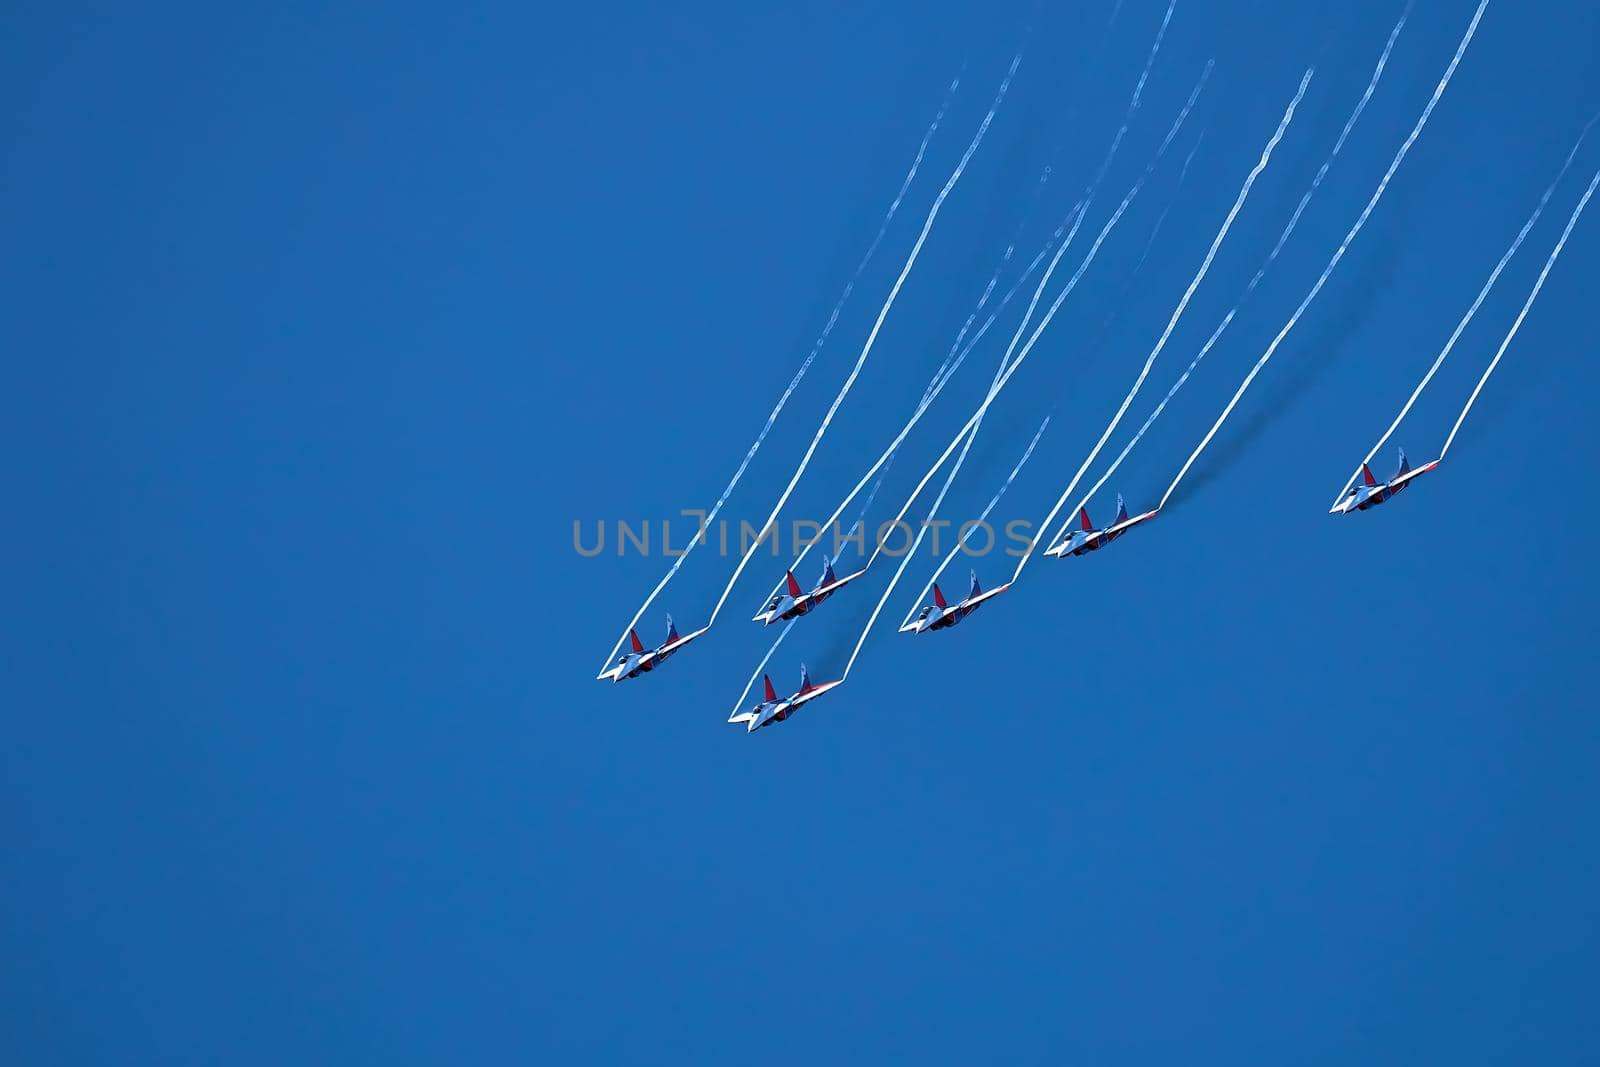 Airshow of the aerobatic team Strizhi - The Swifts. Aerobatic Team on fighters Mig-29, Russian Air Force, on at the International Aviation and Space salon MAKS 2019. ZHUKOVSKY, RUSSIA, 08,27,2019 by EvgeniyQW